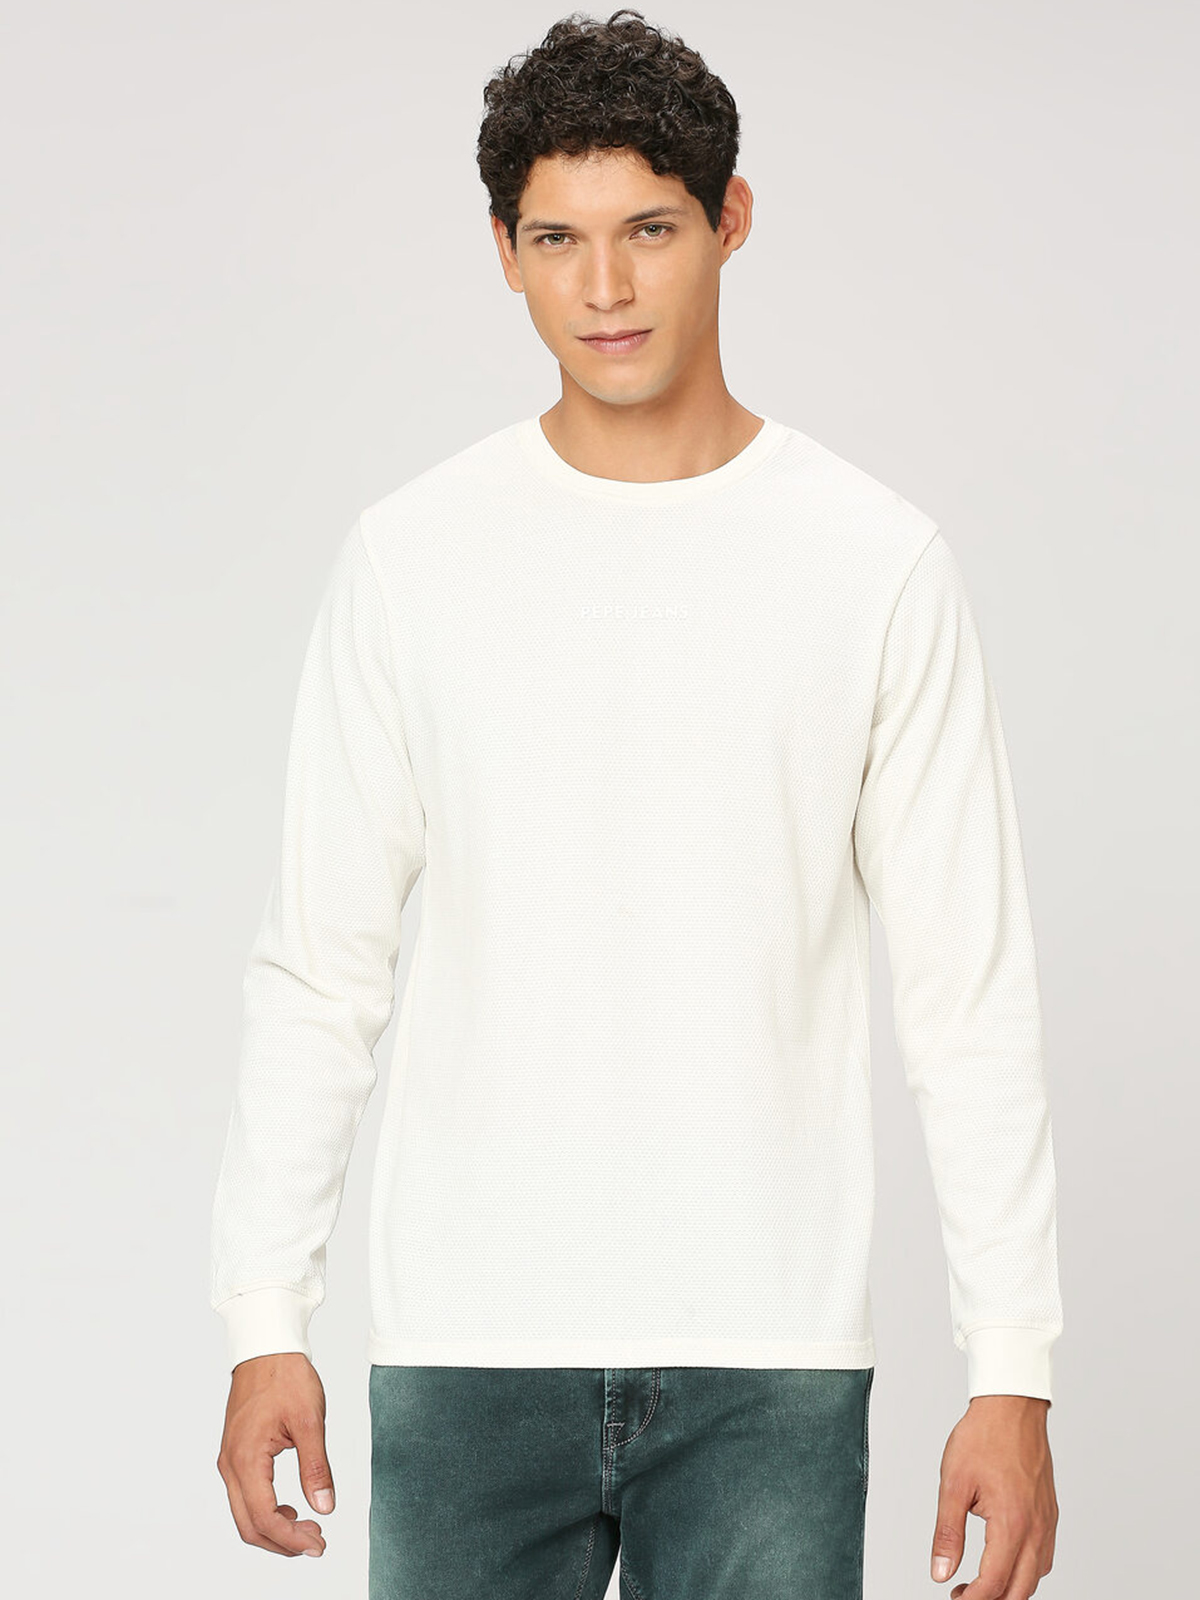 white t G3-MTS16615 - plain shirt Jeans Pepe knitted